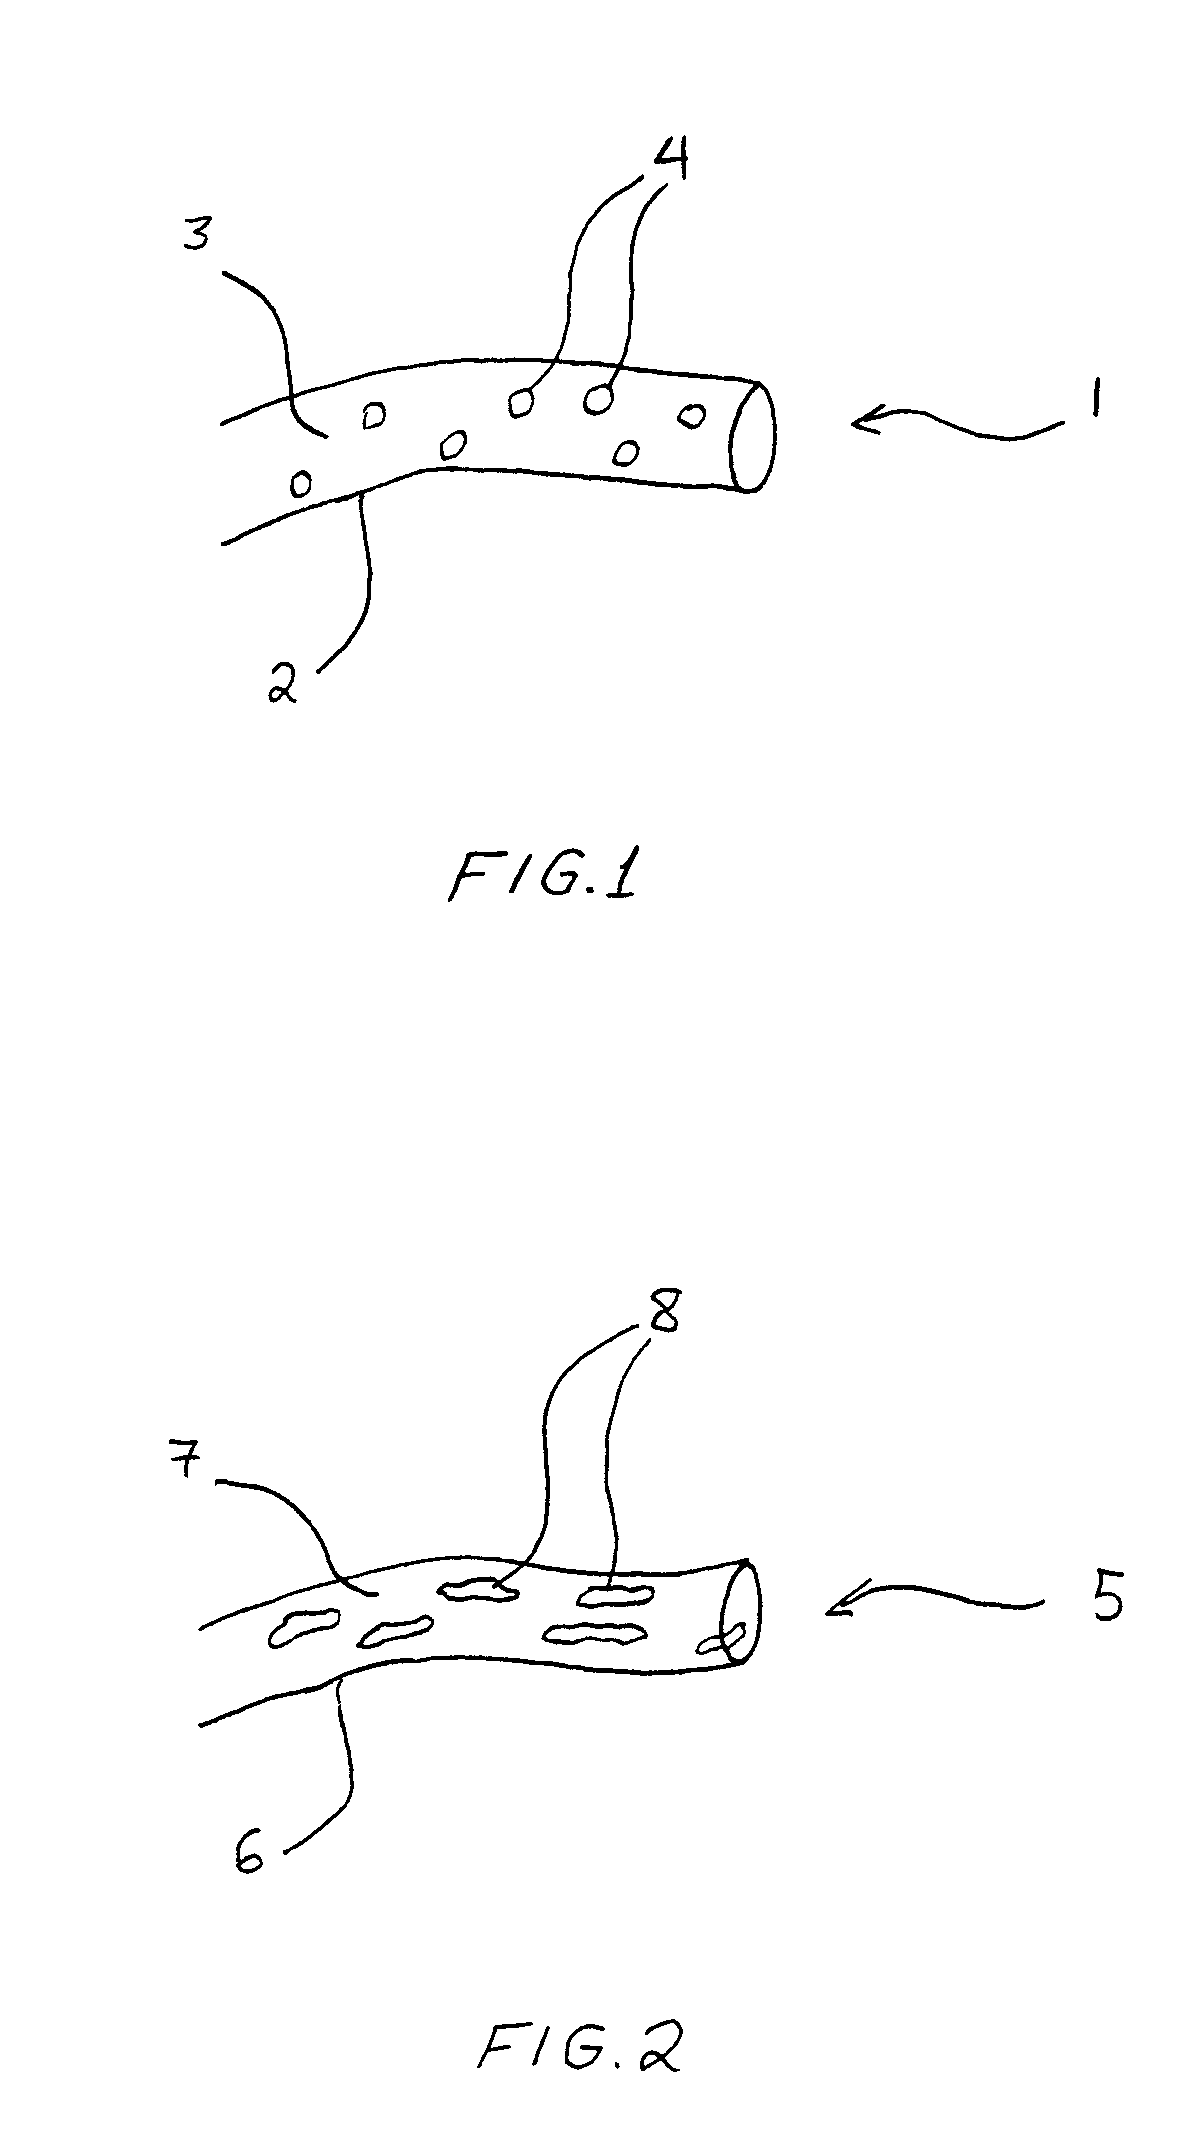 Cellulosic fibers having enhanced reversible thermal properties and methods of forming thereof